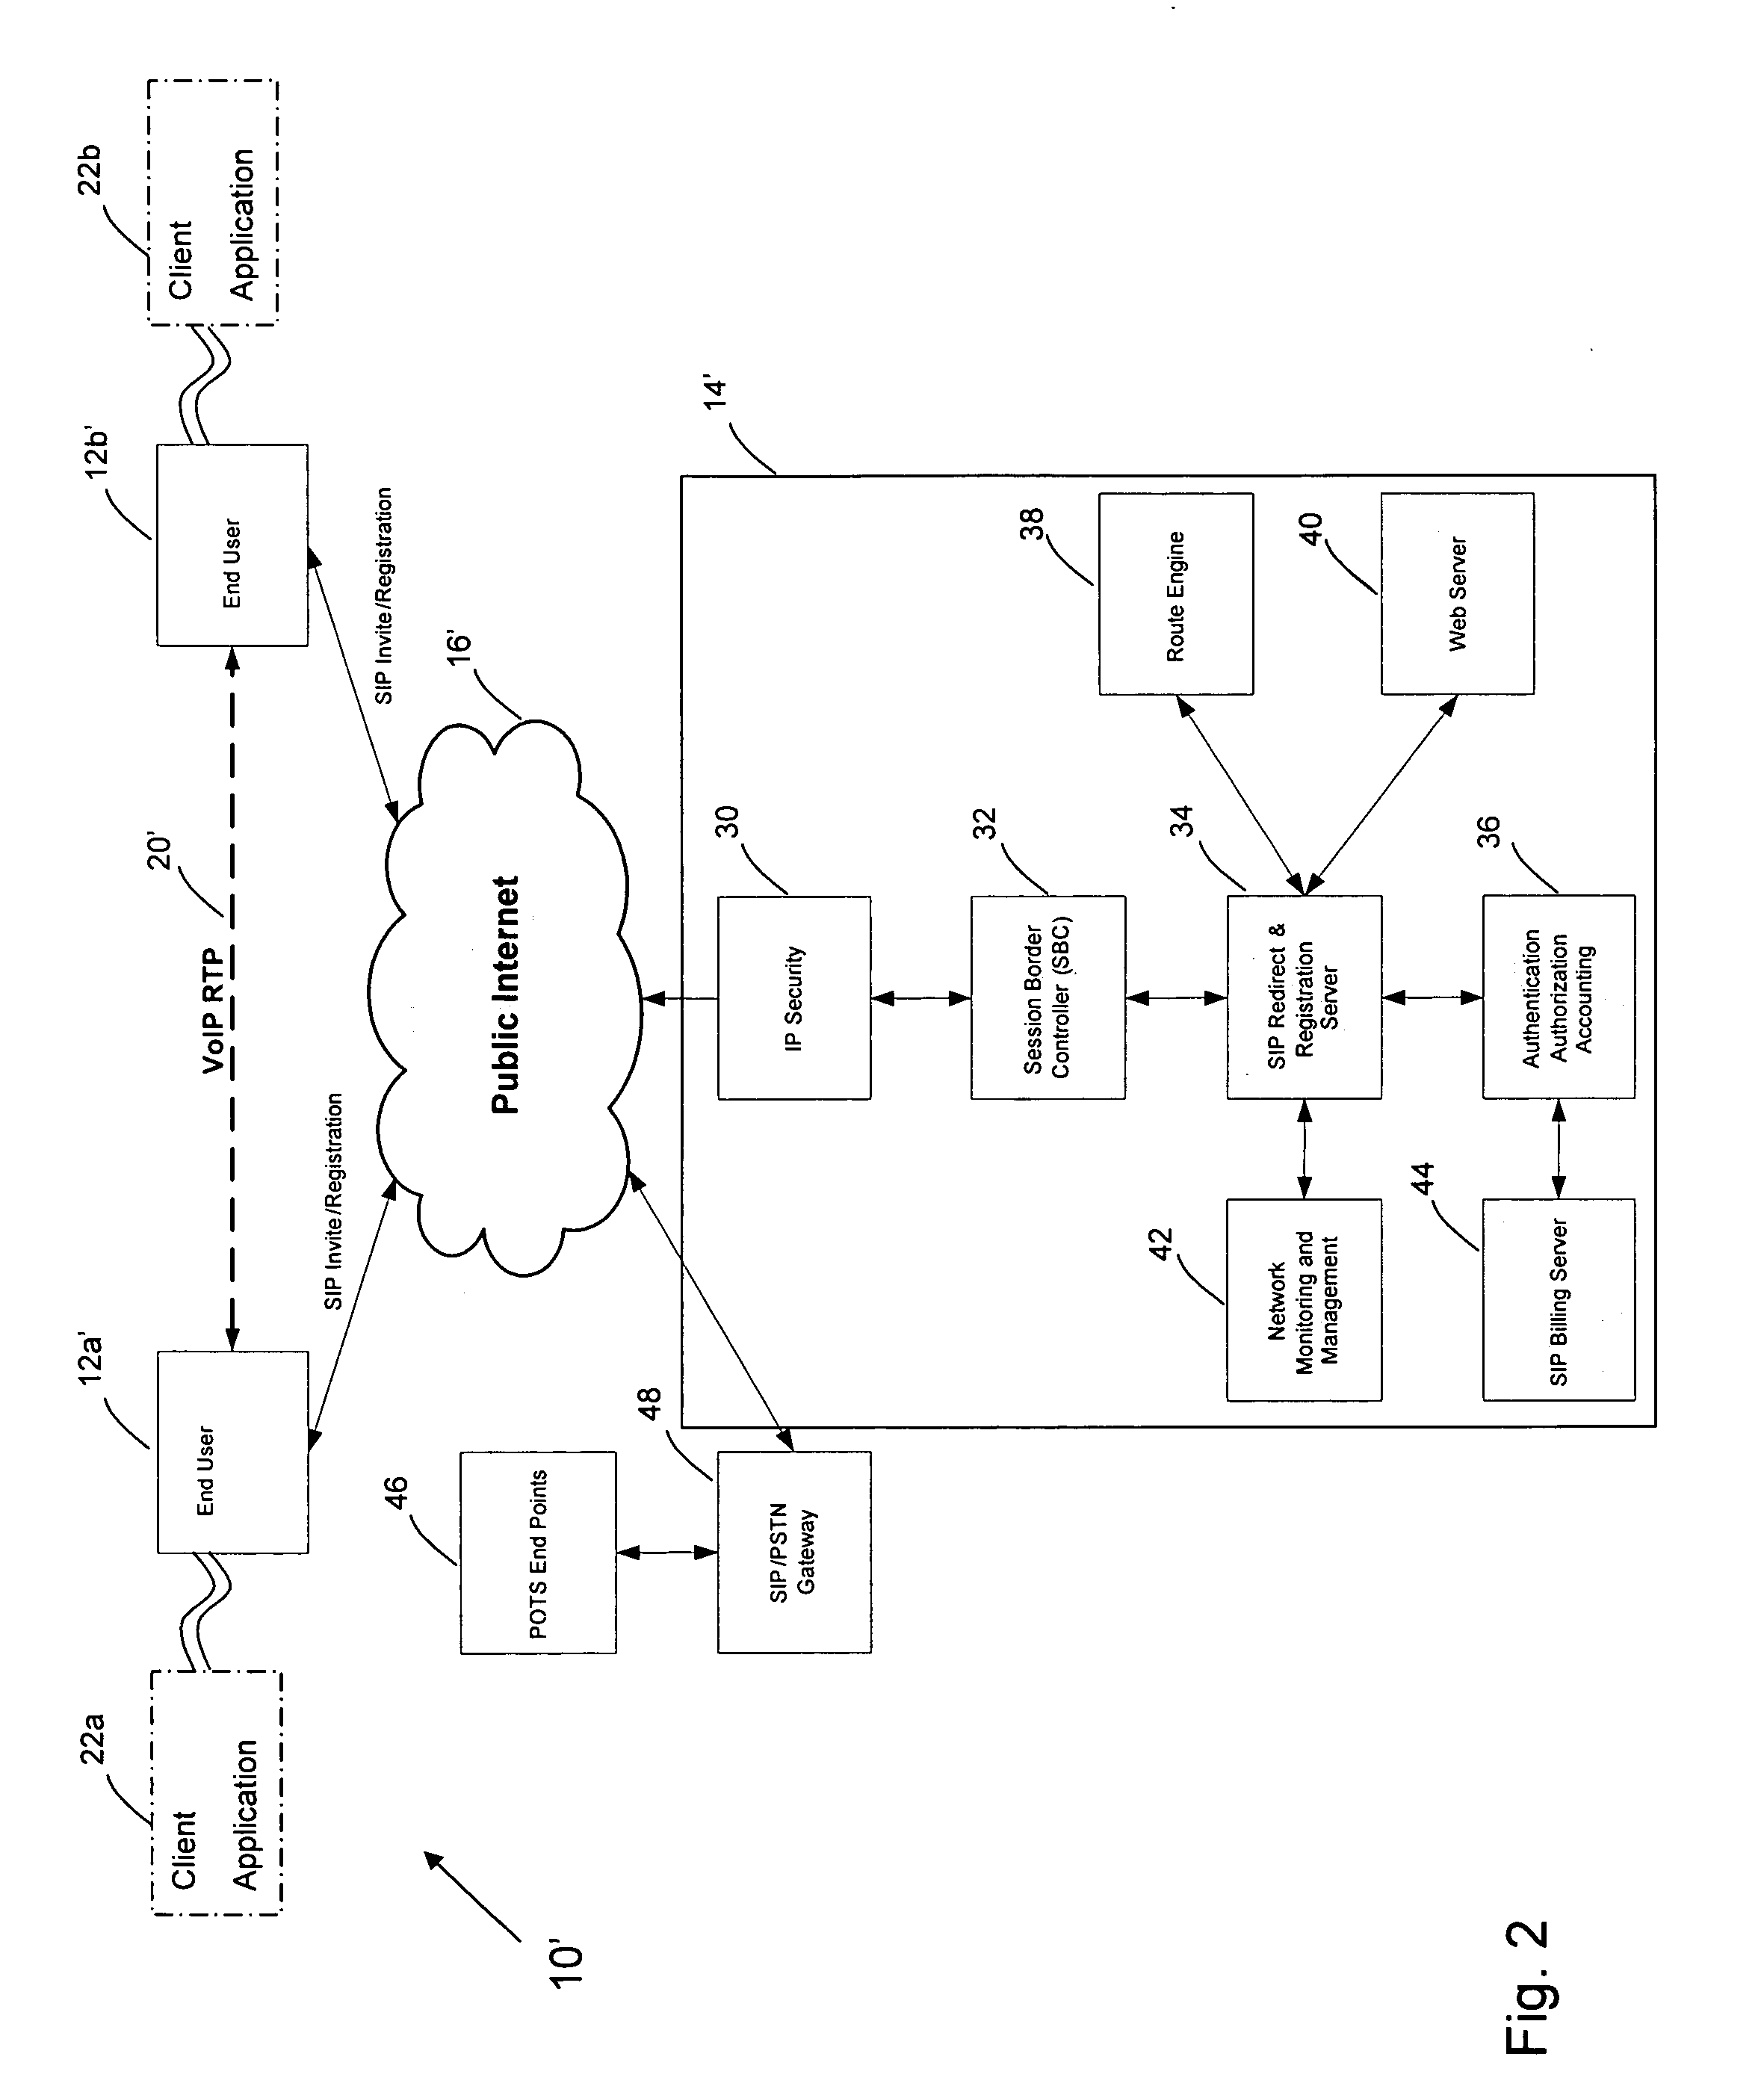 Distributed voice over internet protocol apparatus and systems